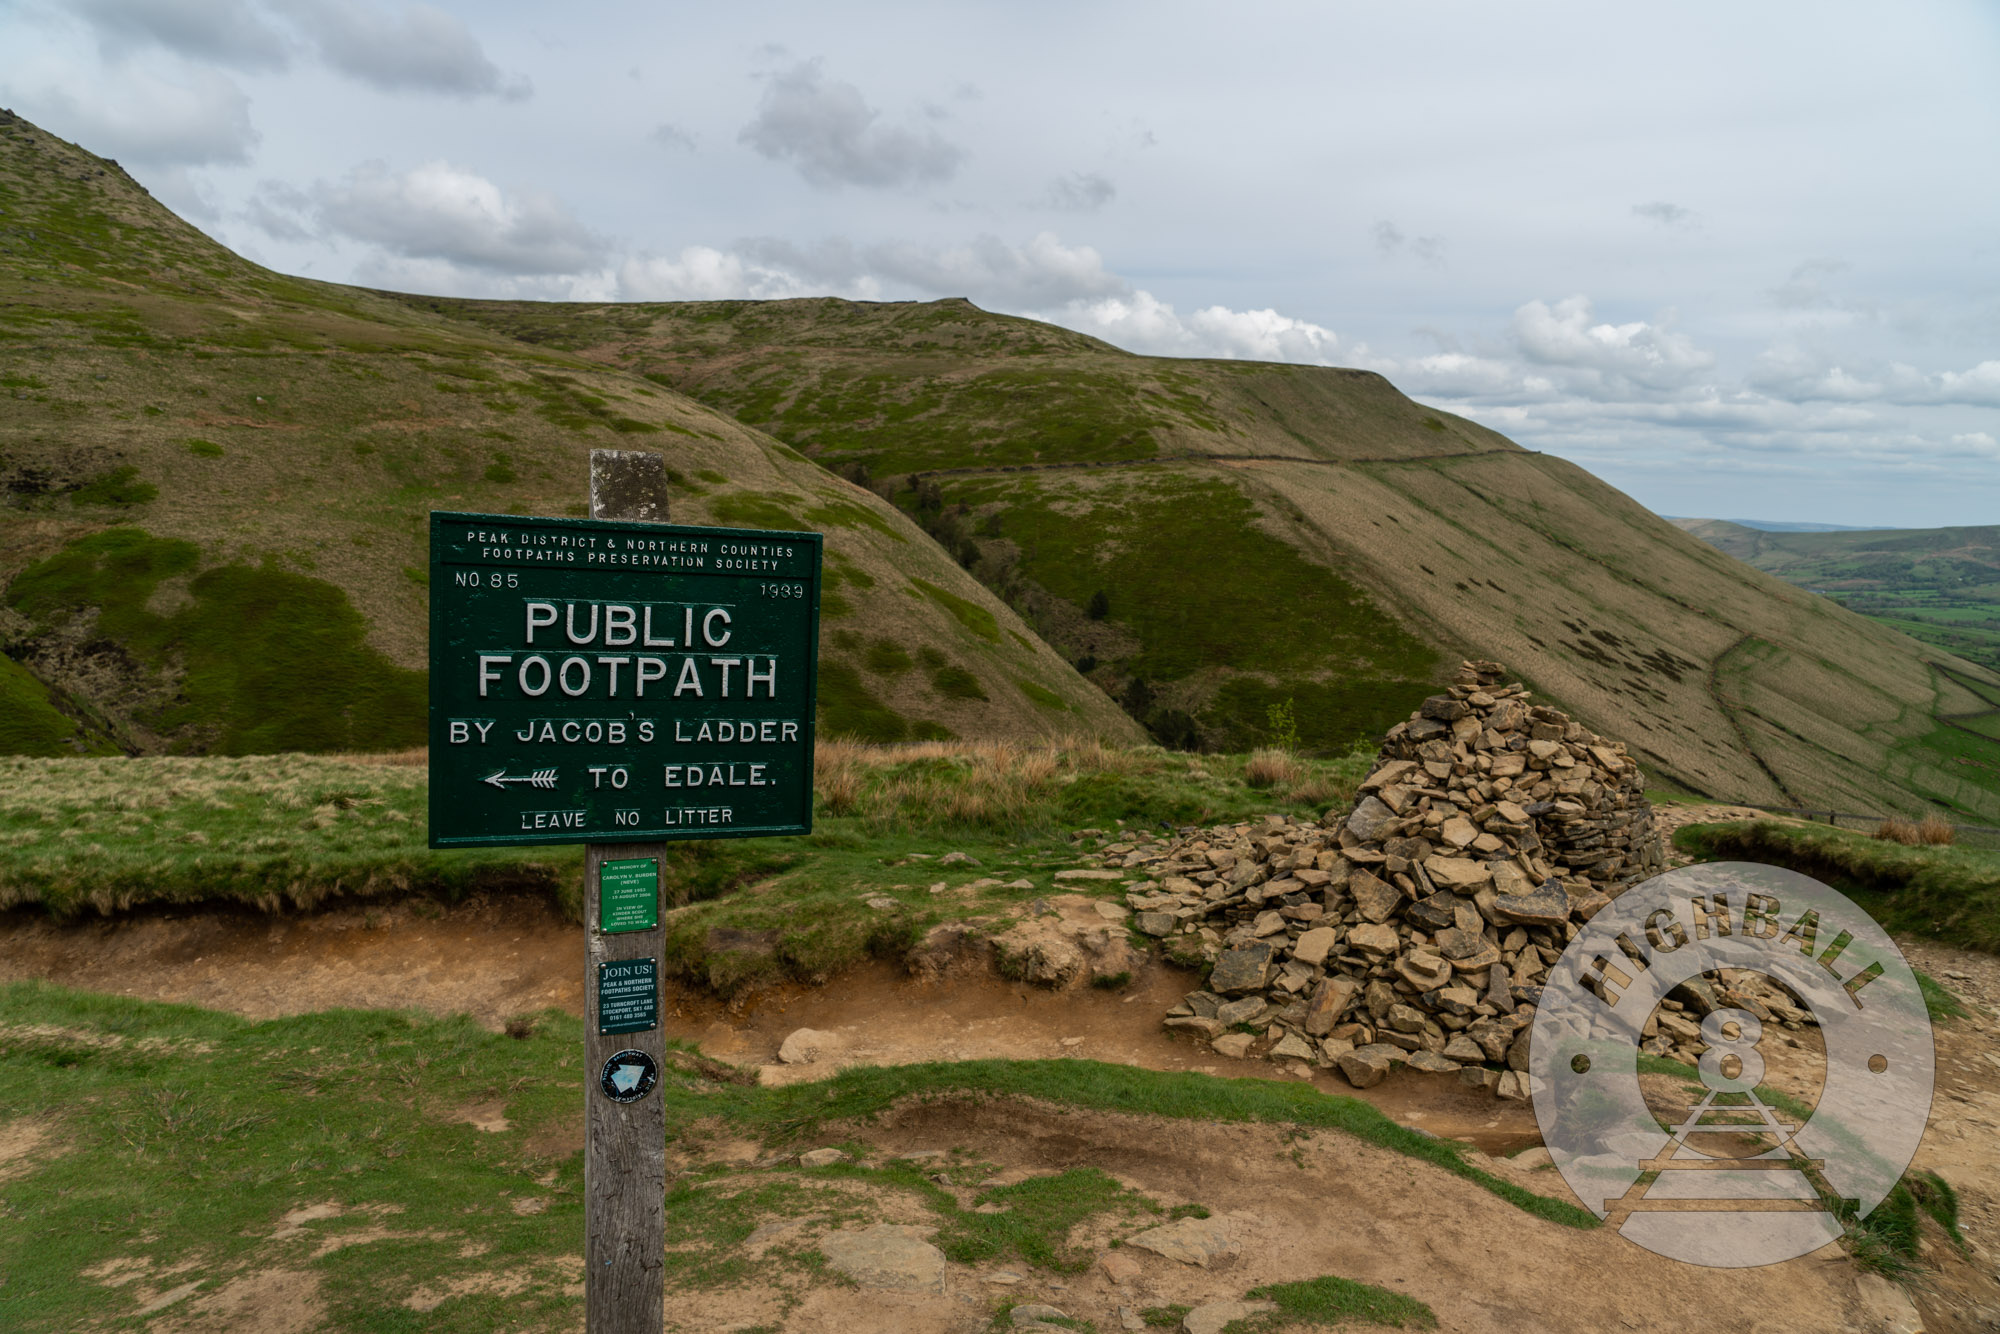 Public Footpath sign at the top of Jacob's Ladder looking east over the Vale of Edale, Peak District, Derbyshire, England, UK, 2018.